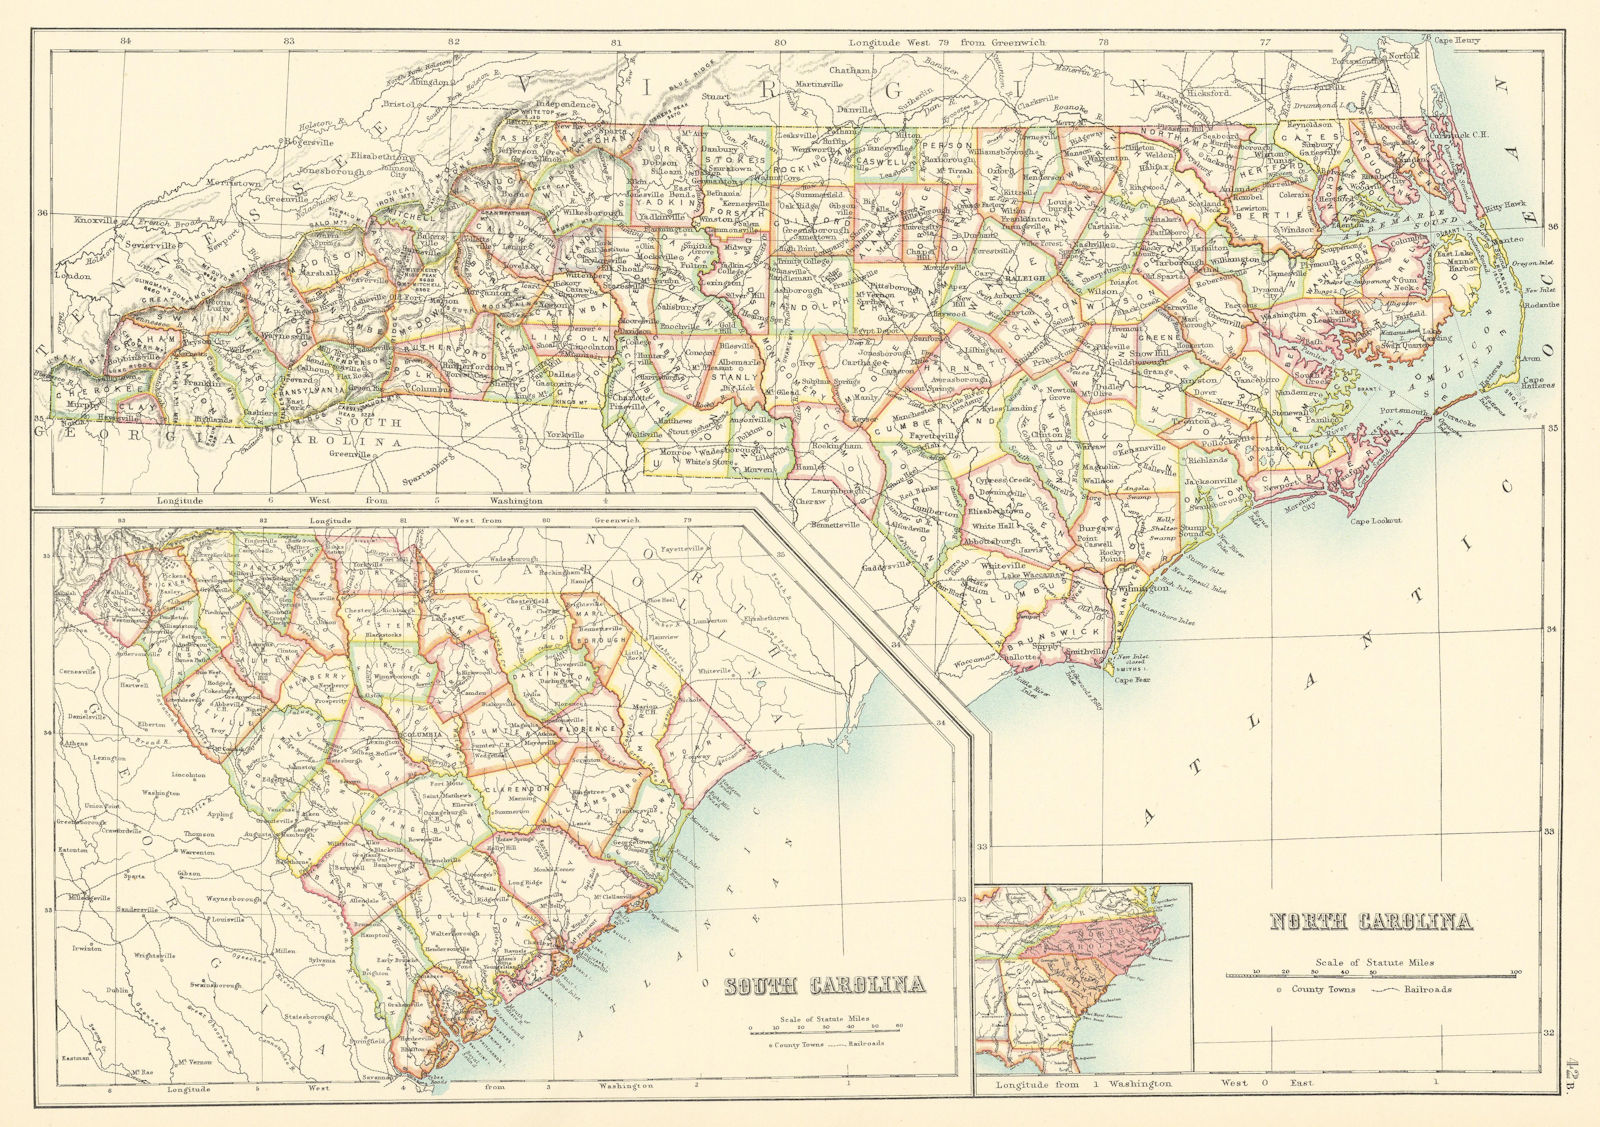 Associate Product North and South Carolina state maps showing counties. BARTHOLOMEW 1898 old